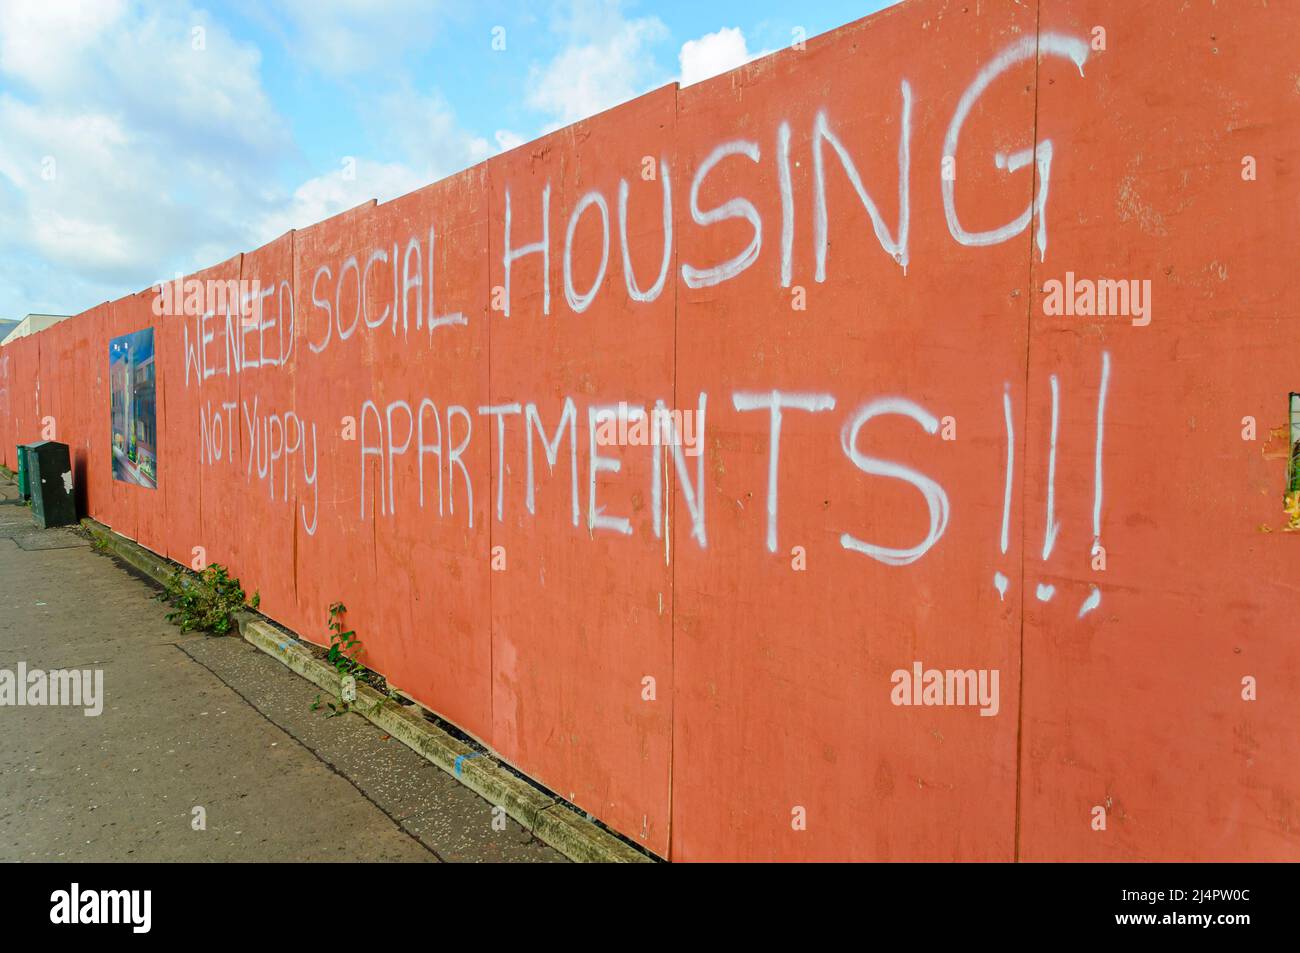 Graffiti protesting the building of an apartment block saying 'We need social housing, not yuppy apartments', Belfast, Northern Ireland. Stock Photo